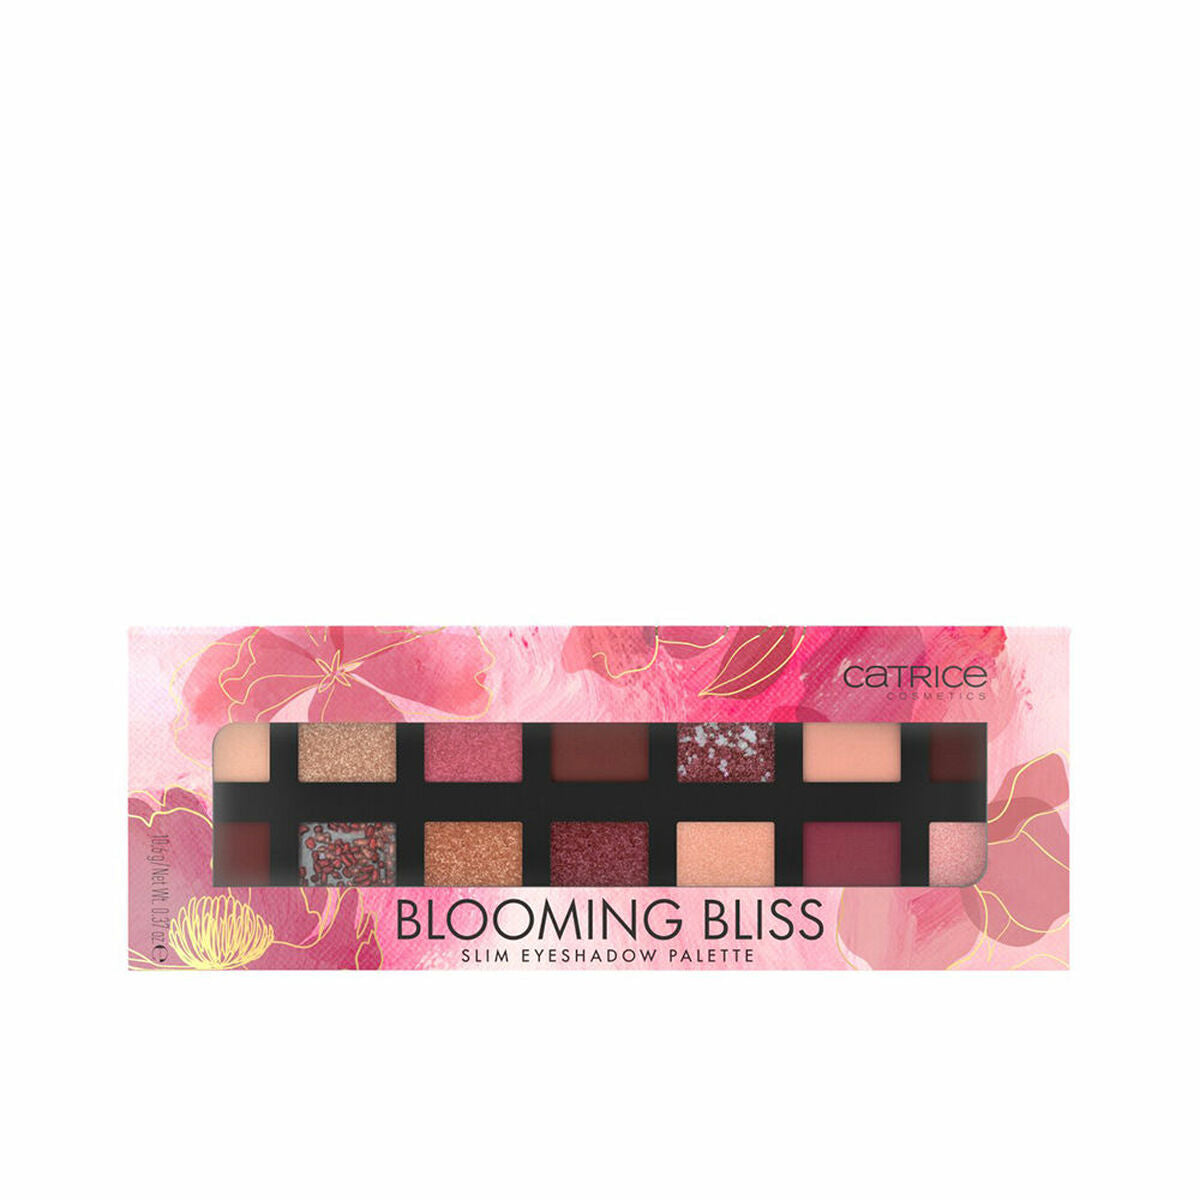 Palette mit Lidschatten Catrice Blooming Bliss Nº 020 Colors of Bloom 10,6 g - CA International 